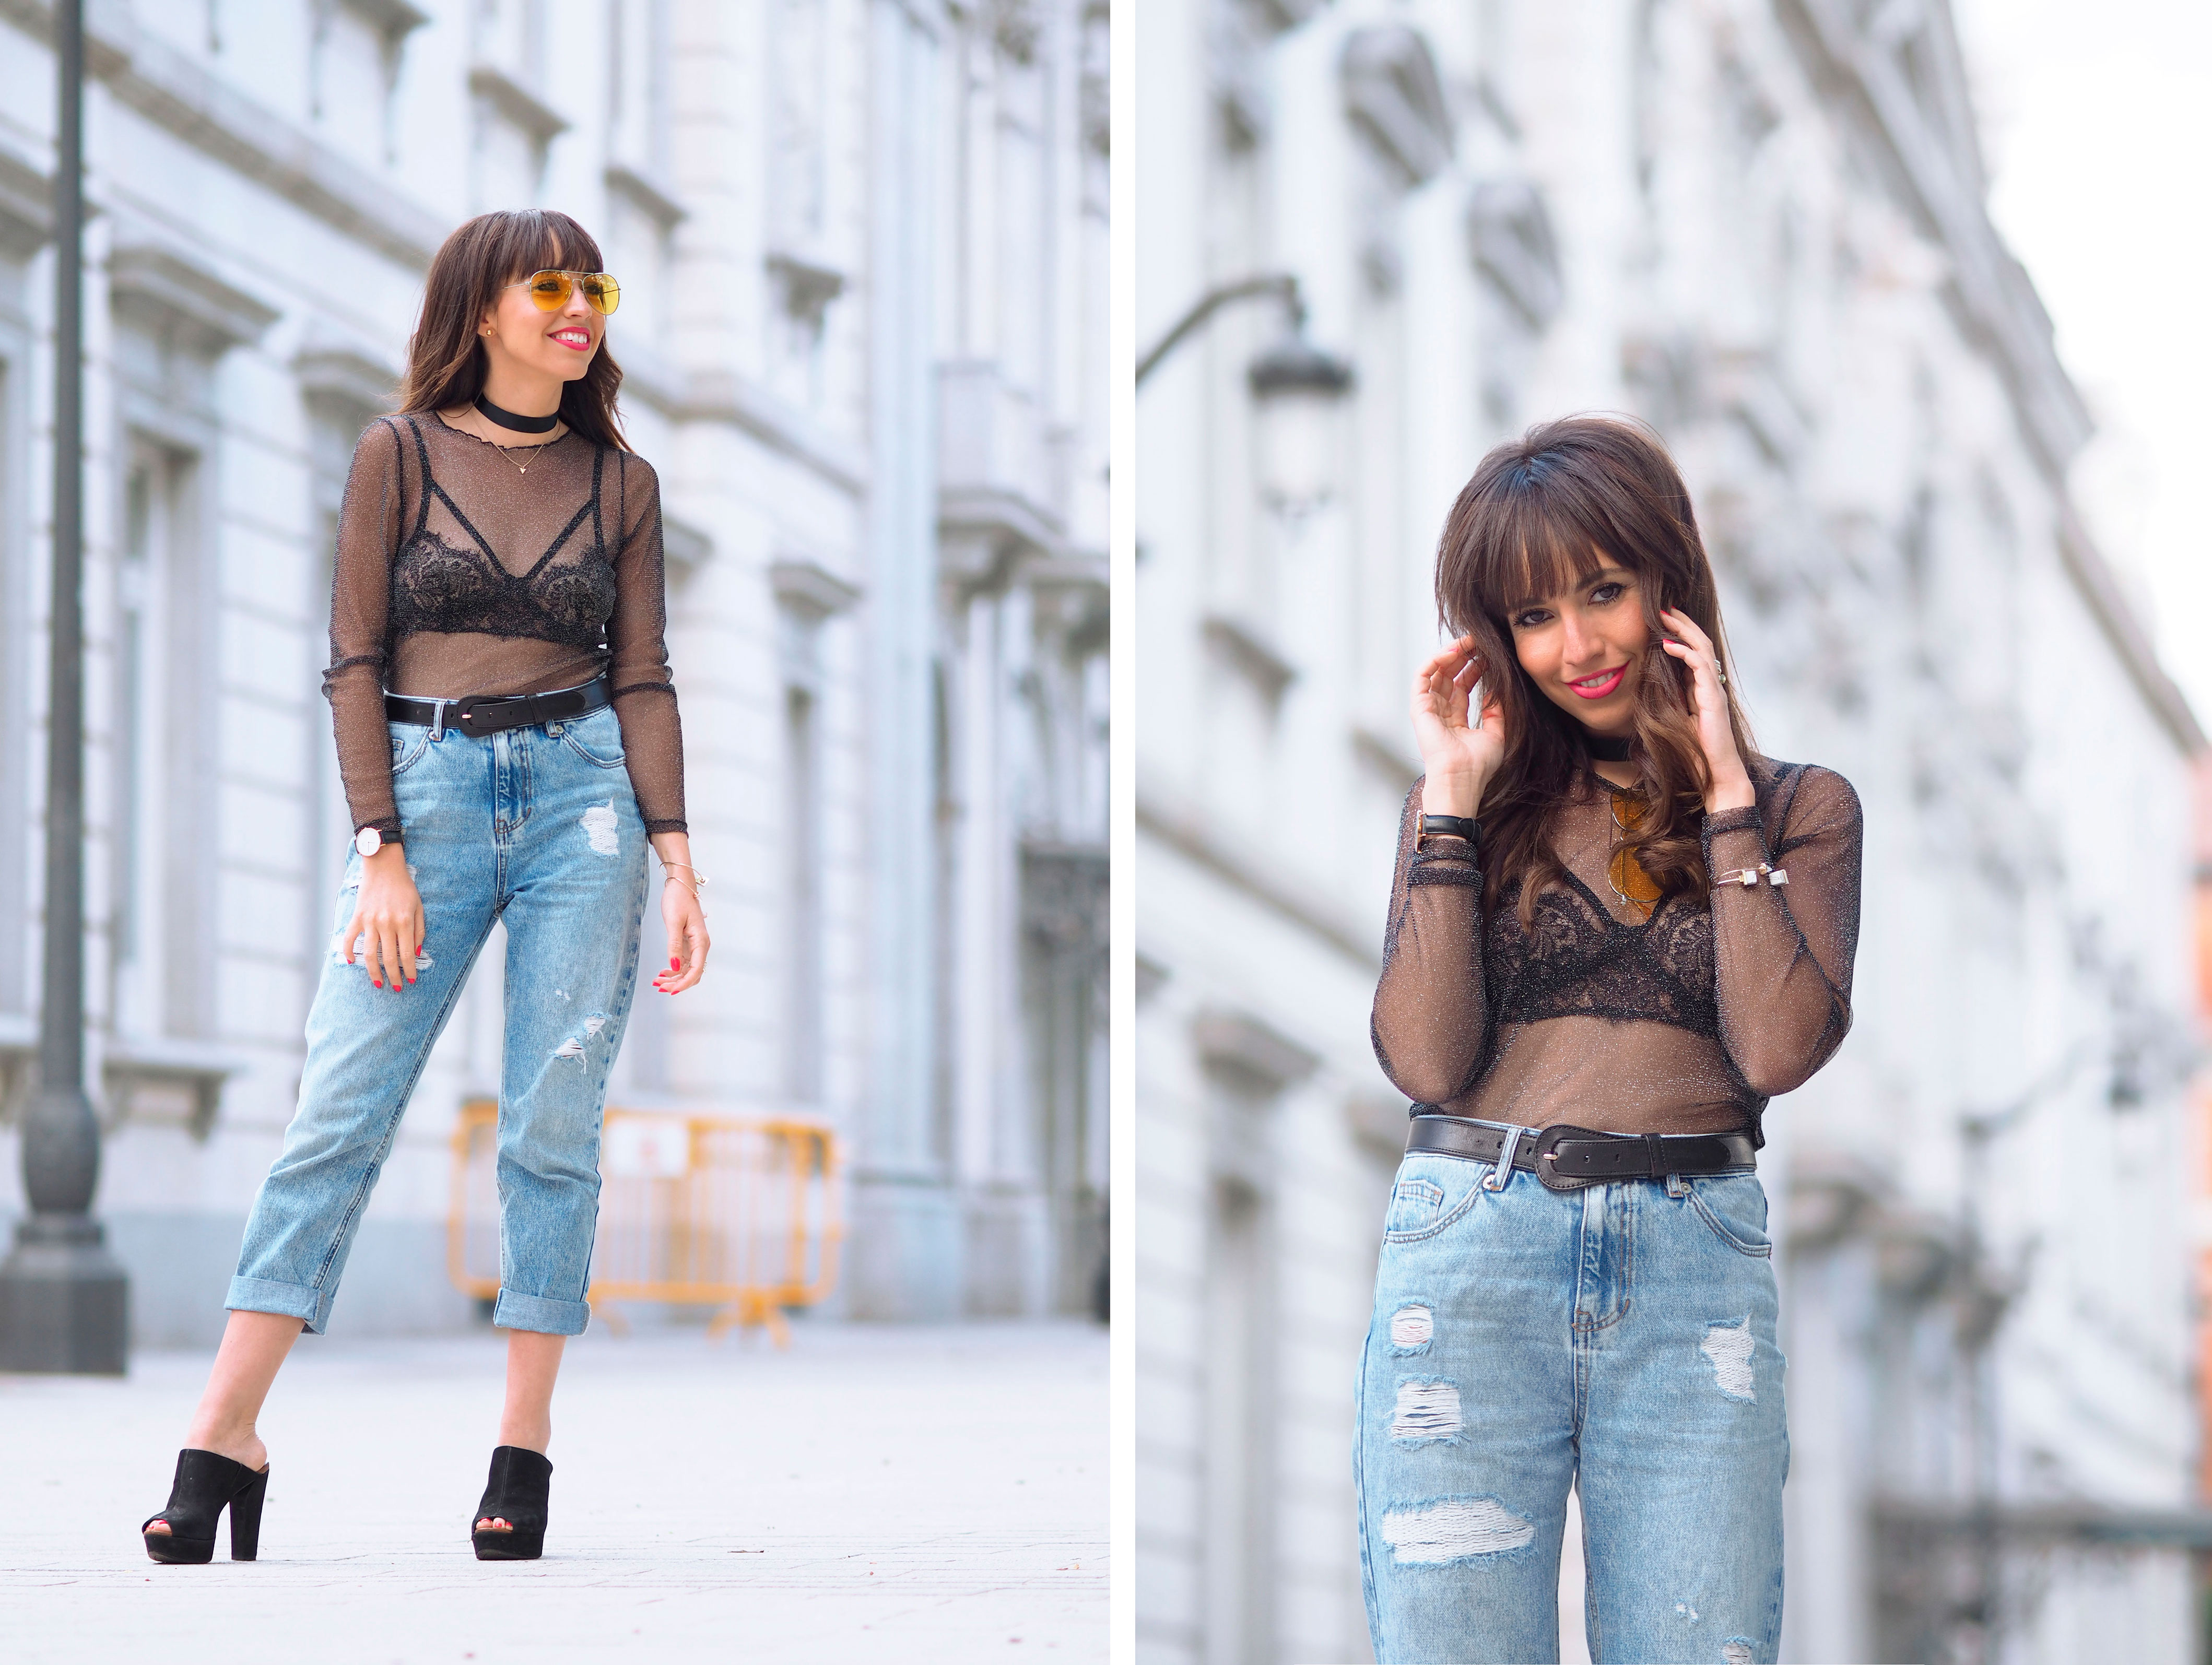 BLACK LACE BRALETTE & TULLE TOP: OUTFIT